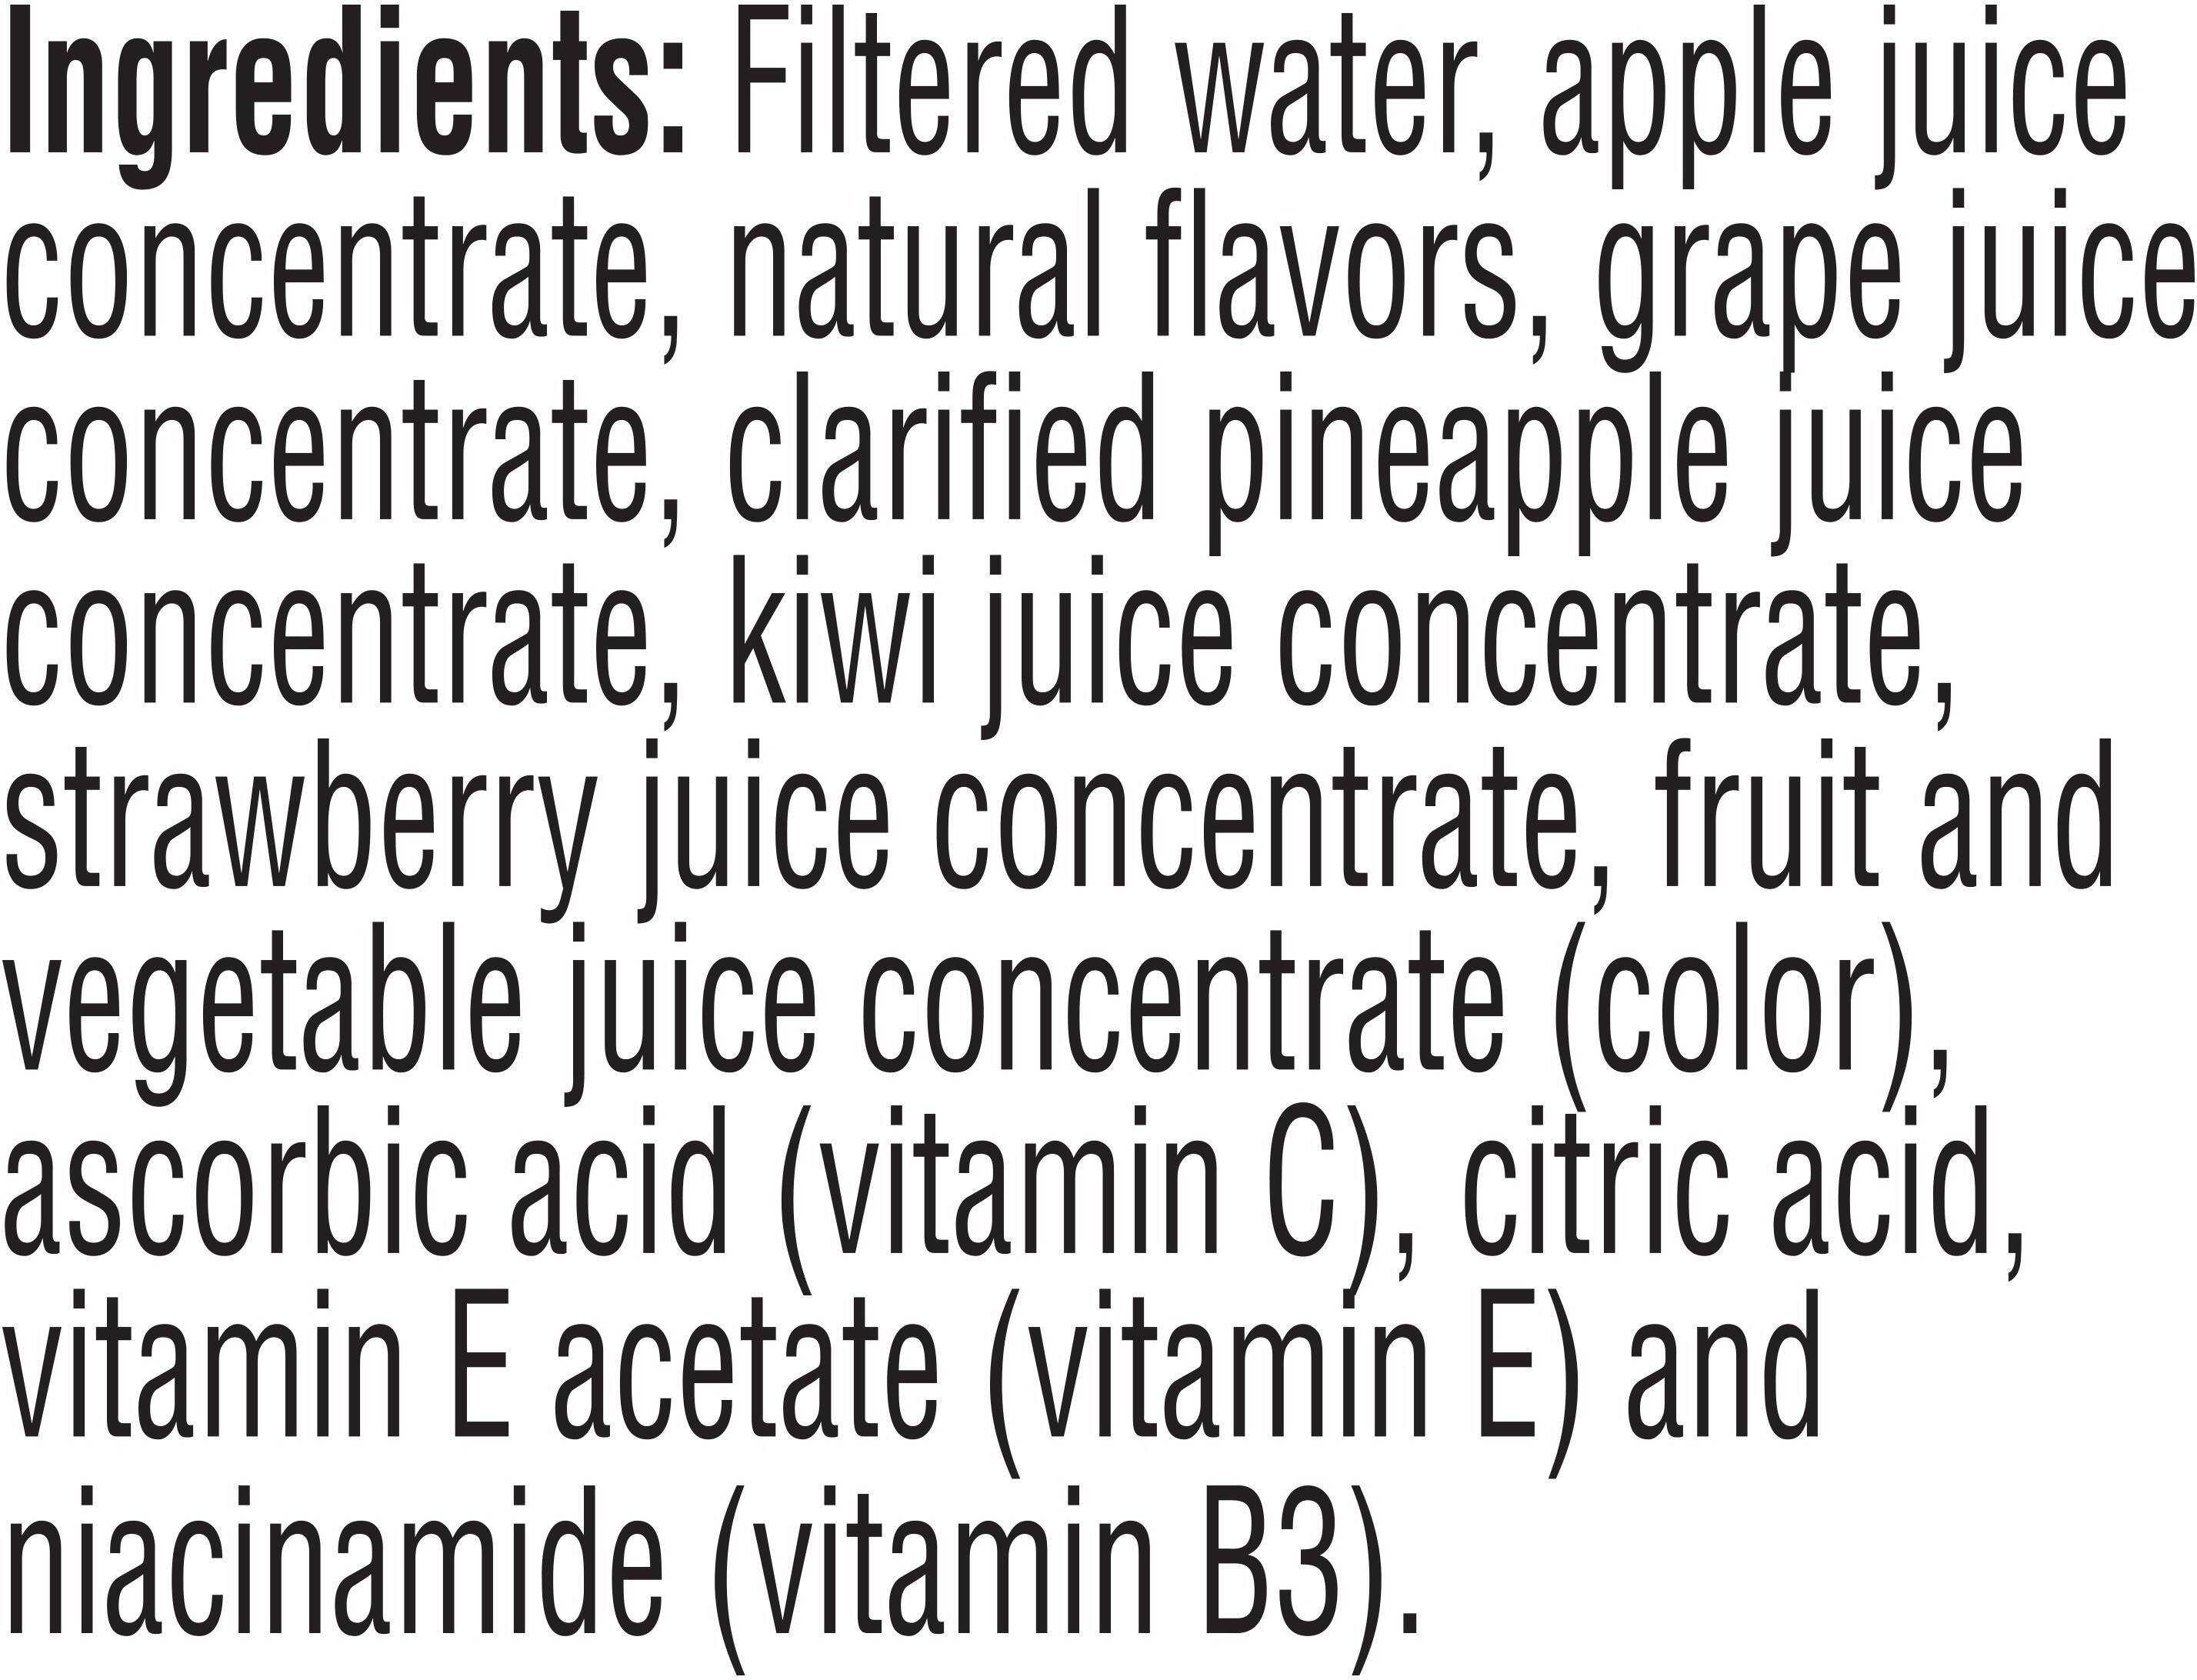 Image describing nutrition information for product Tropicana Strawberry Kiwi